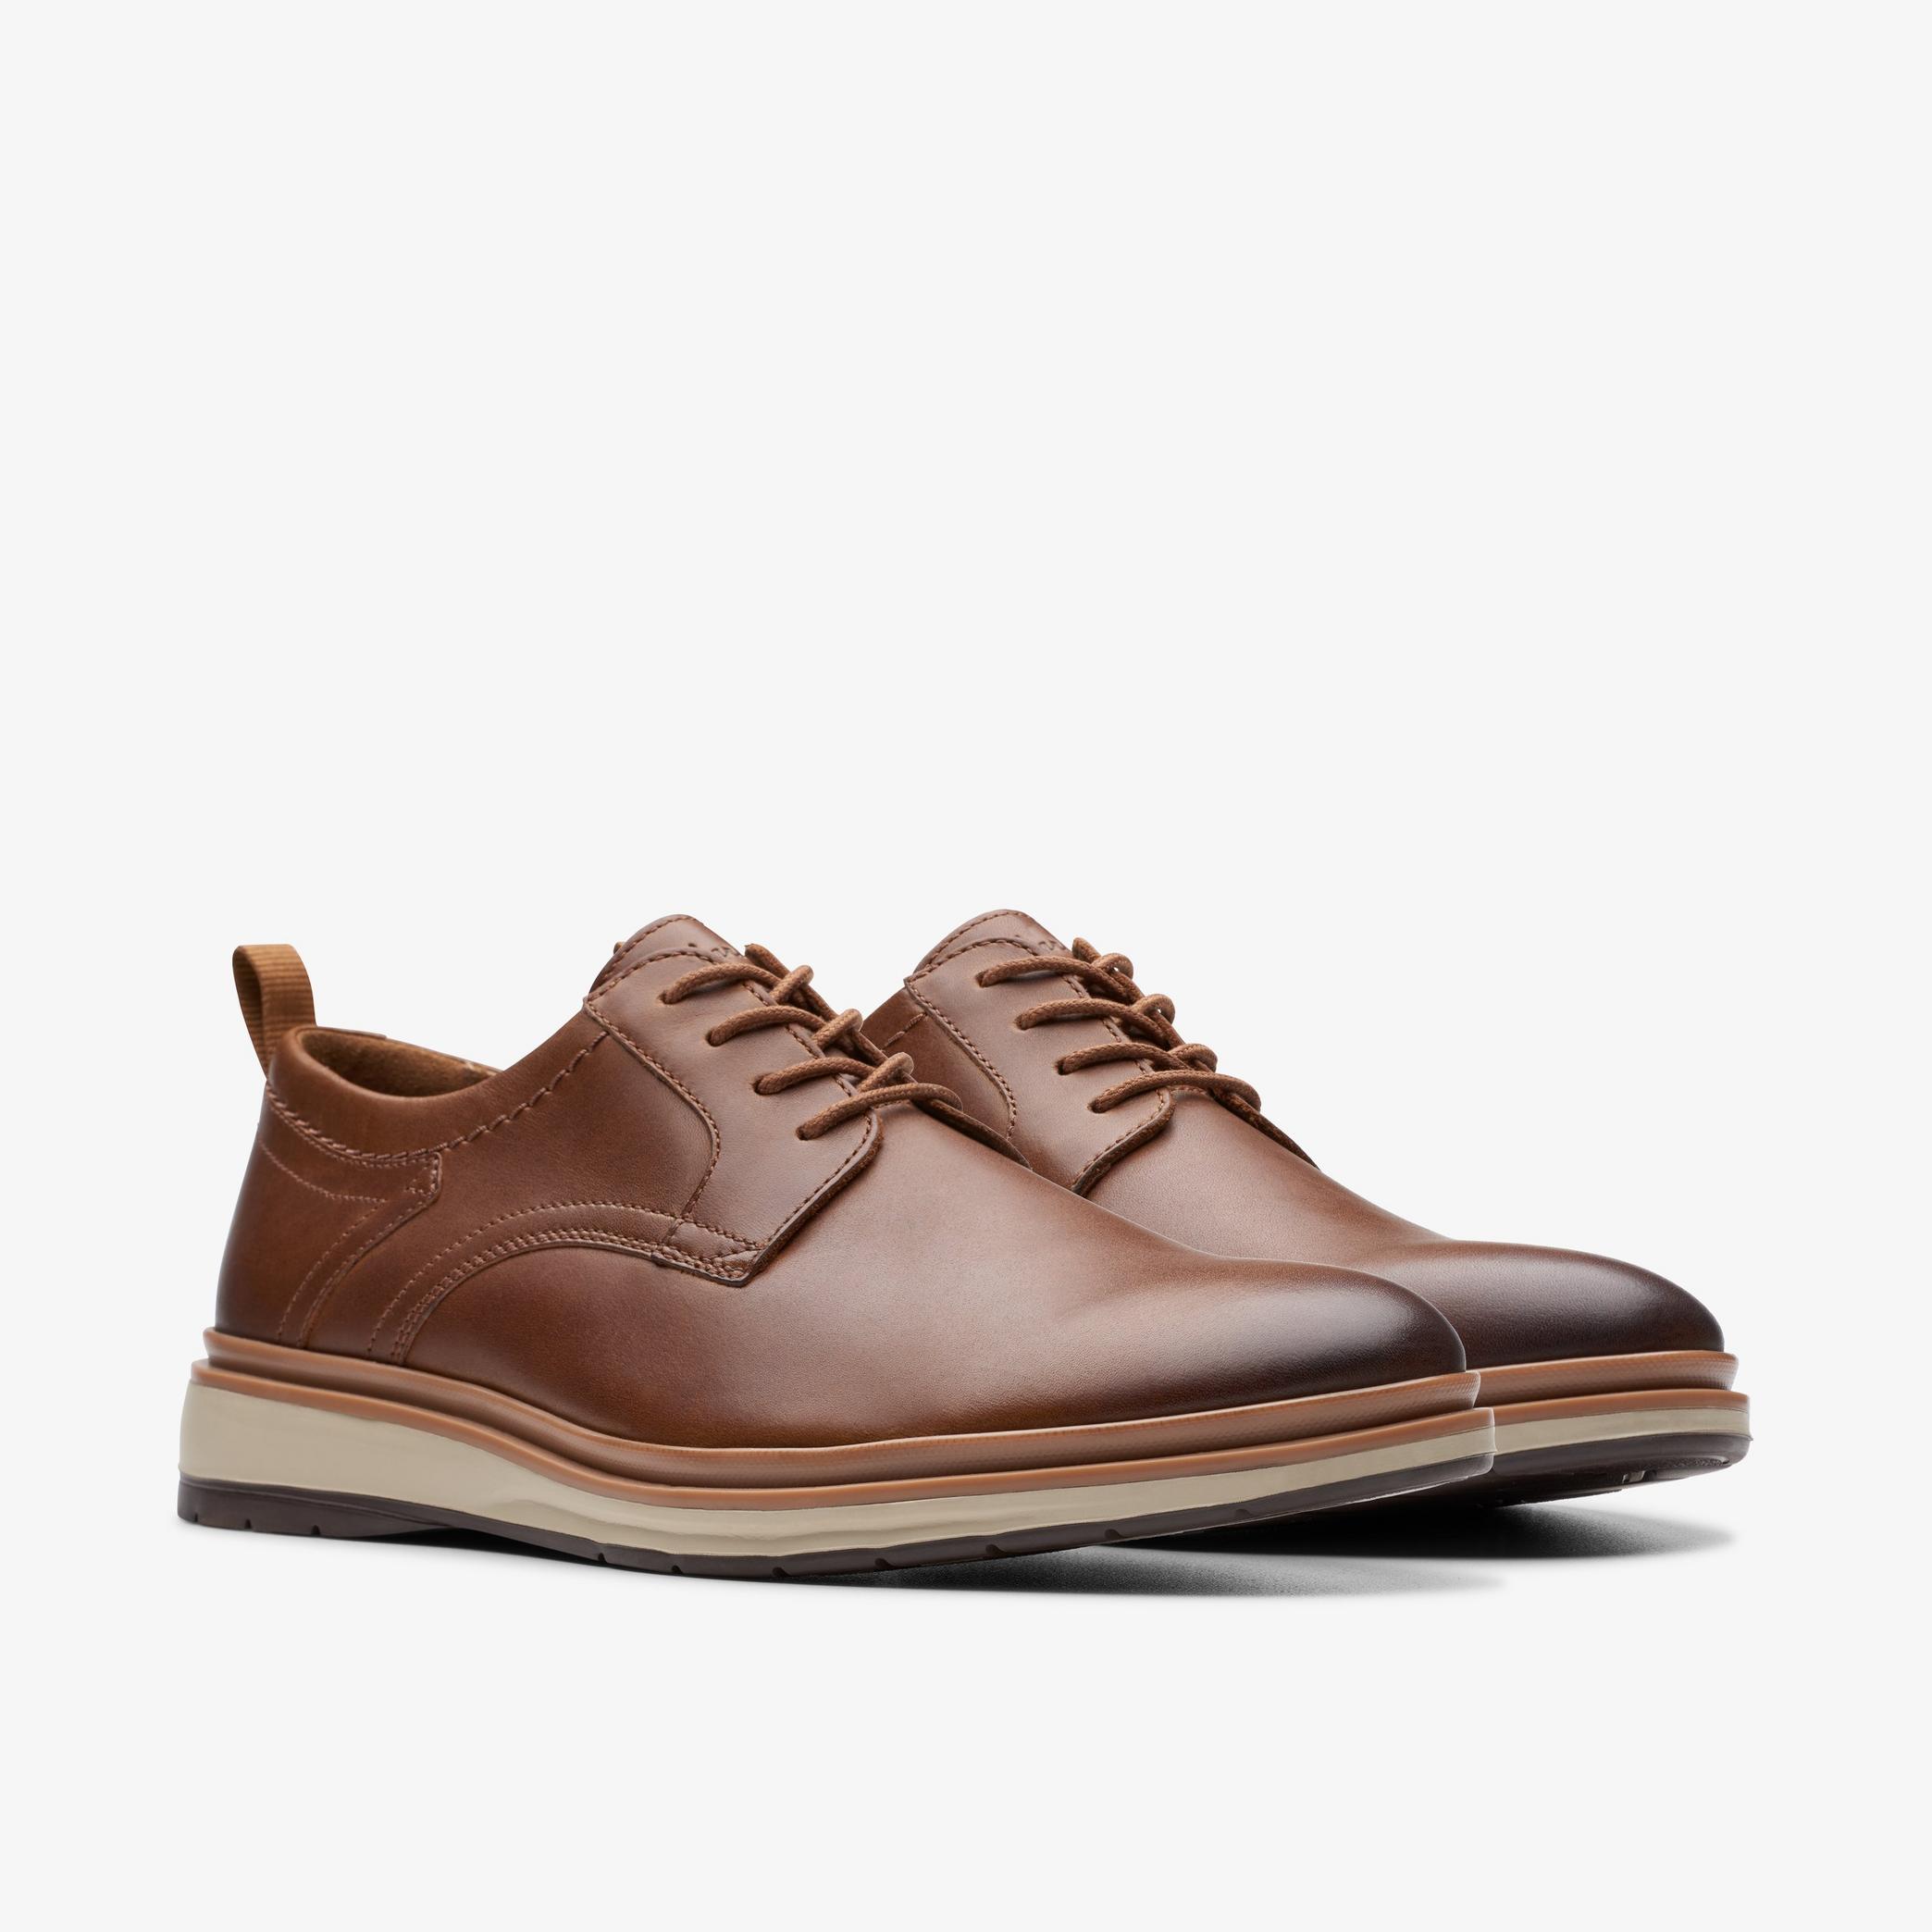 Chantry Lo Dark Tan Leather Oxford Shoes, view 4 of 6